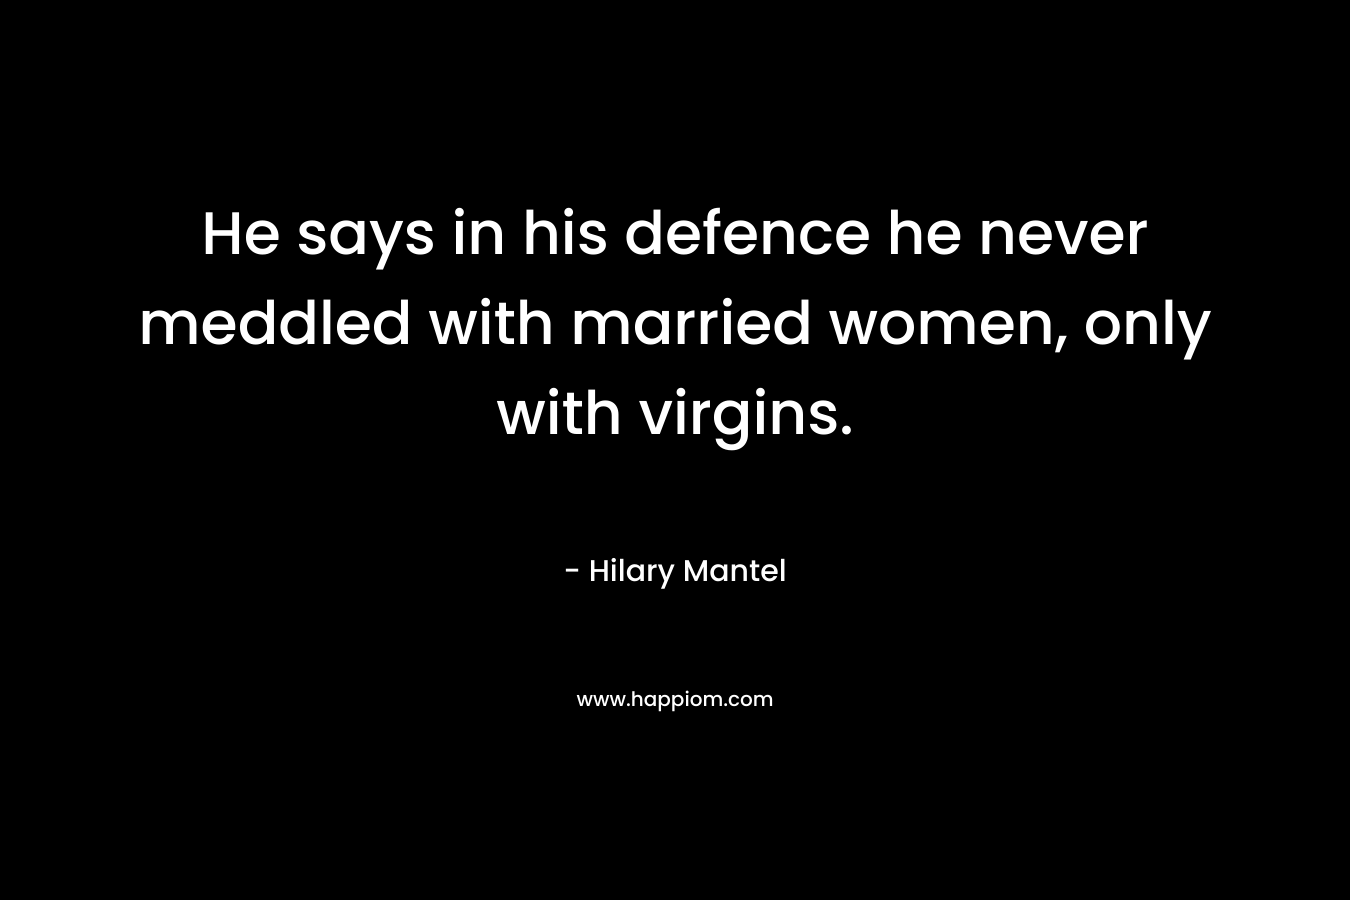 He says in his defence he never meddled with married women, only with virgins.